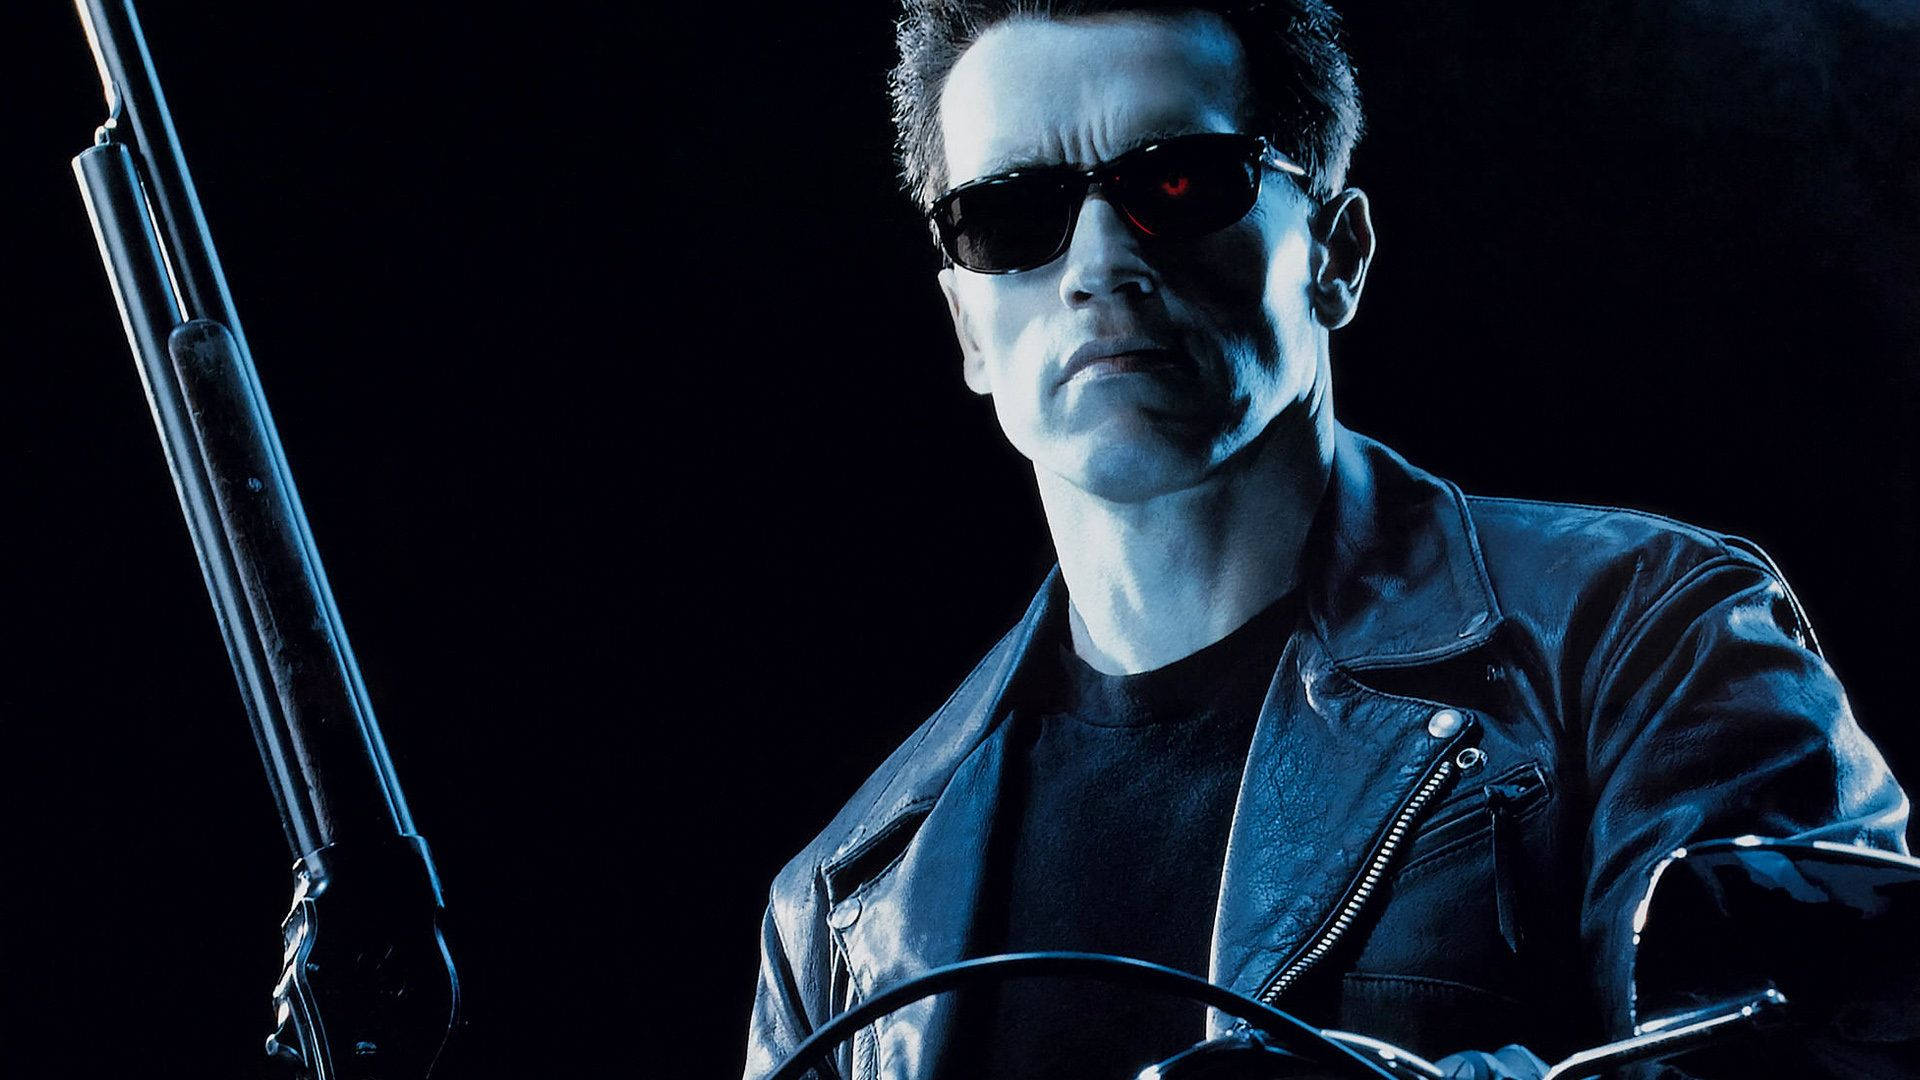 1920X1080 Terminator Wallpaper and Background